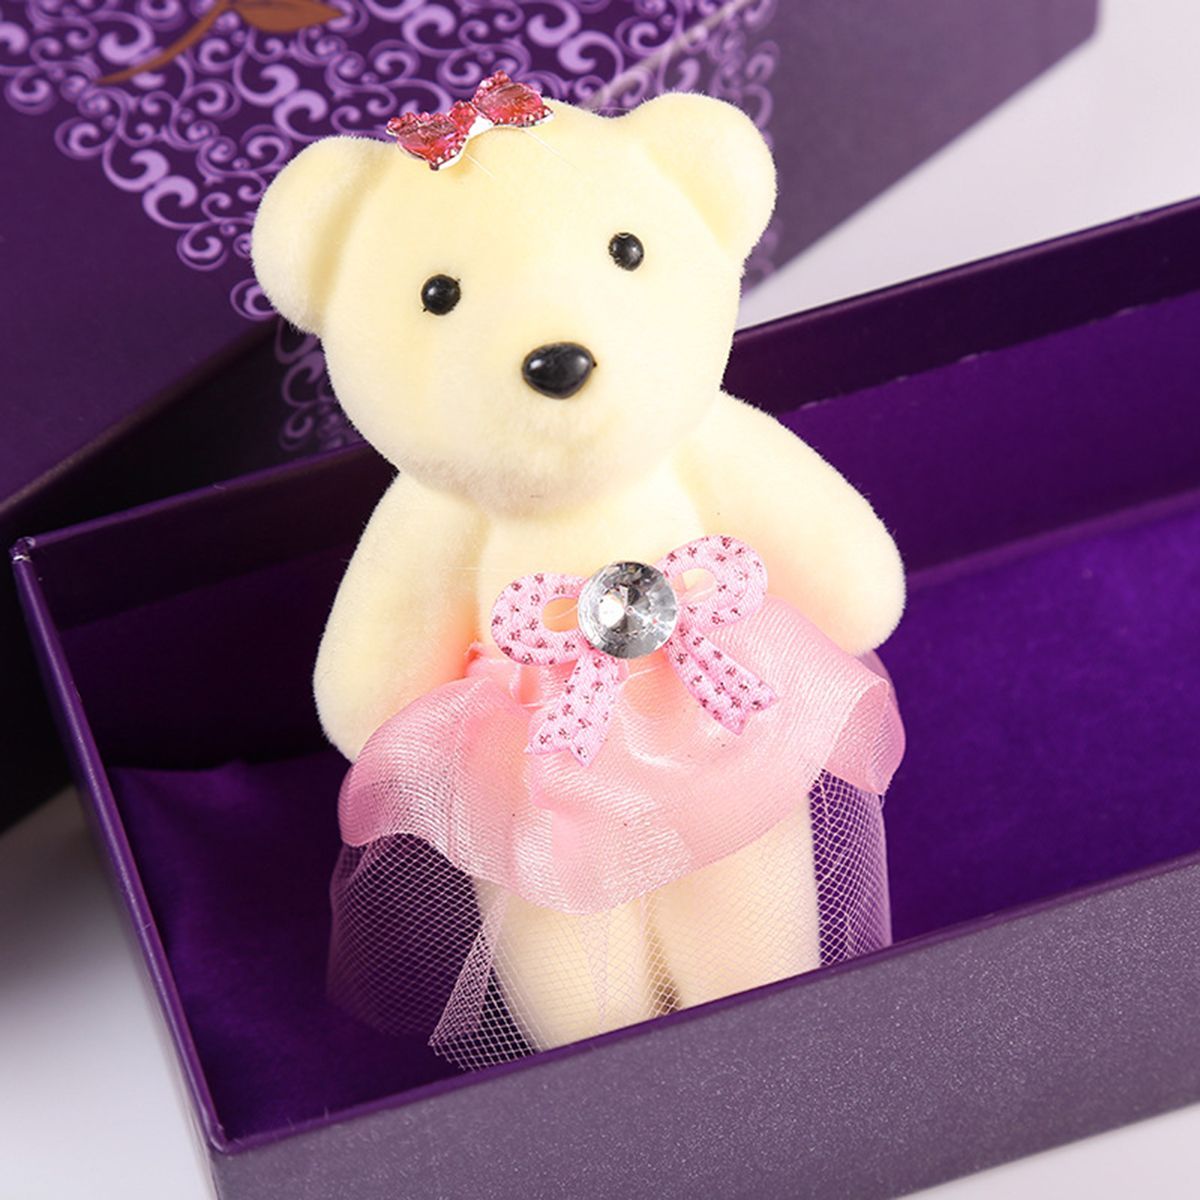 24K-Gold-Plated-Rose-Flower-Valentines-Day-Birthday-Gifts-with-Cute-Teddy-Bear-Decorations-1515761